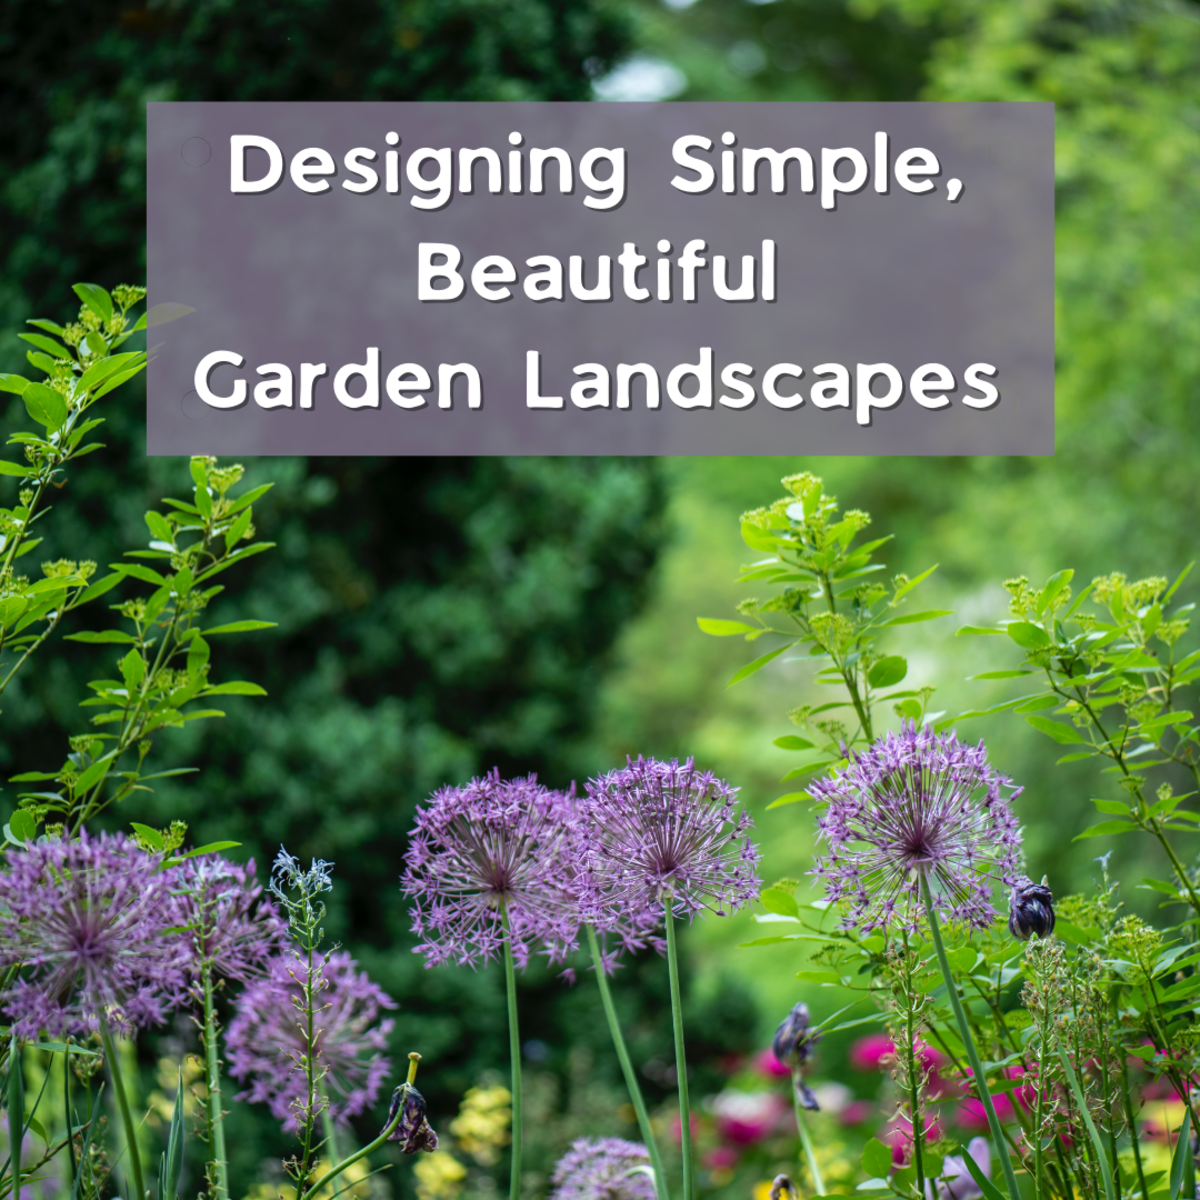 Learn how to design and plan a simple landscape for your garden, including garden exposure, choosing suitable plants, and more!